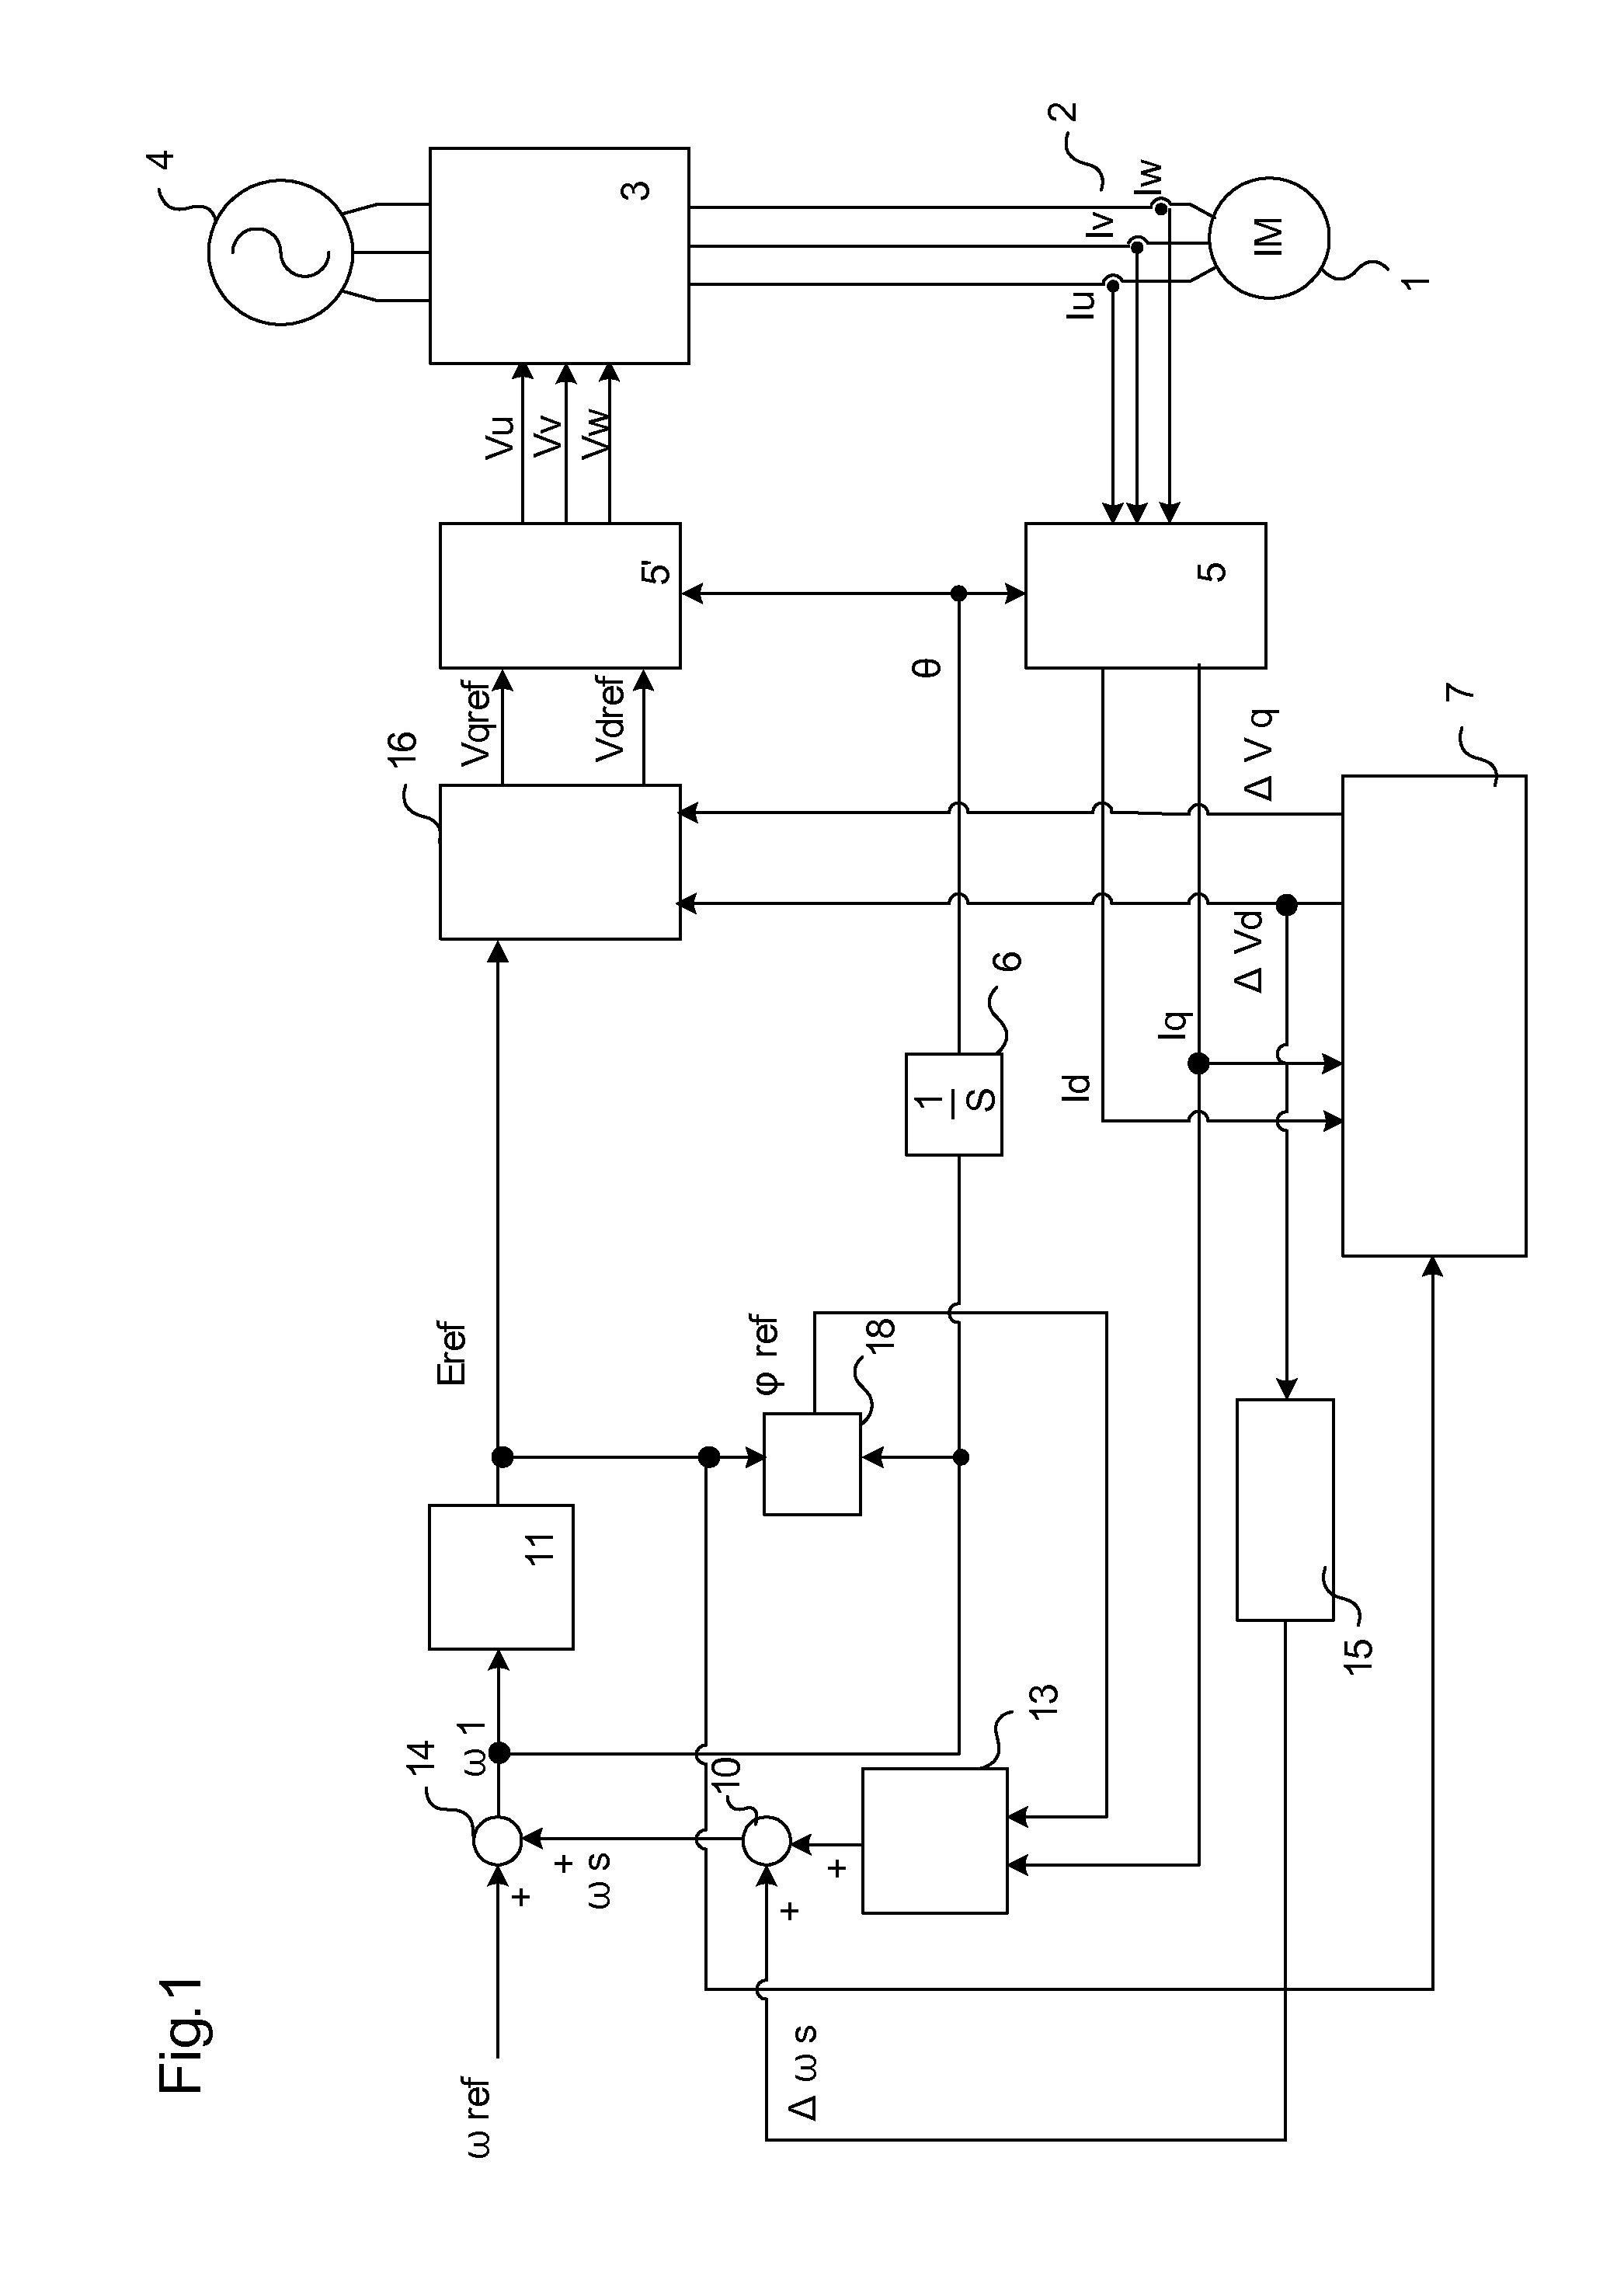 Control device for induction motor